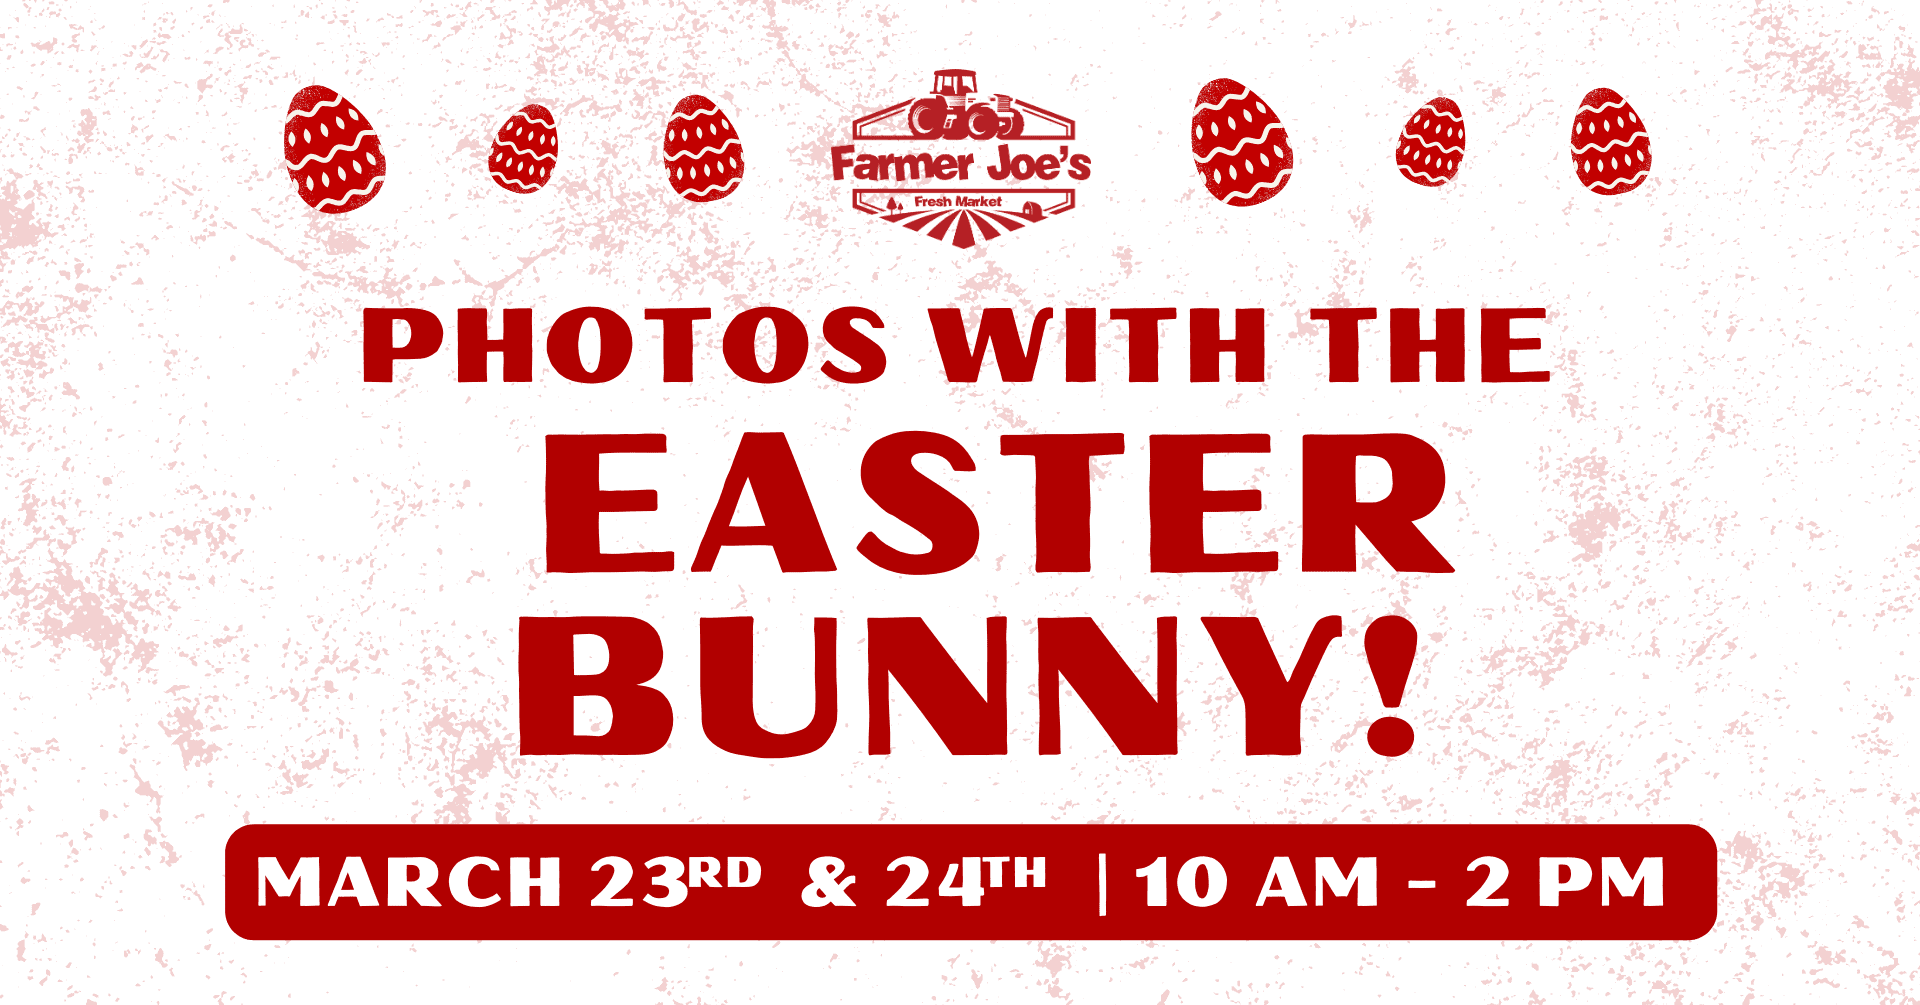 FJ-Easter-Bunny-Event-Graphic